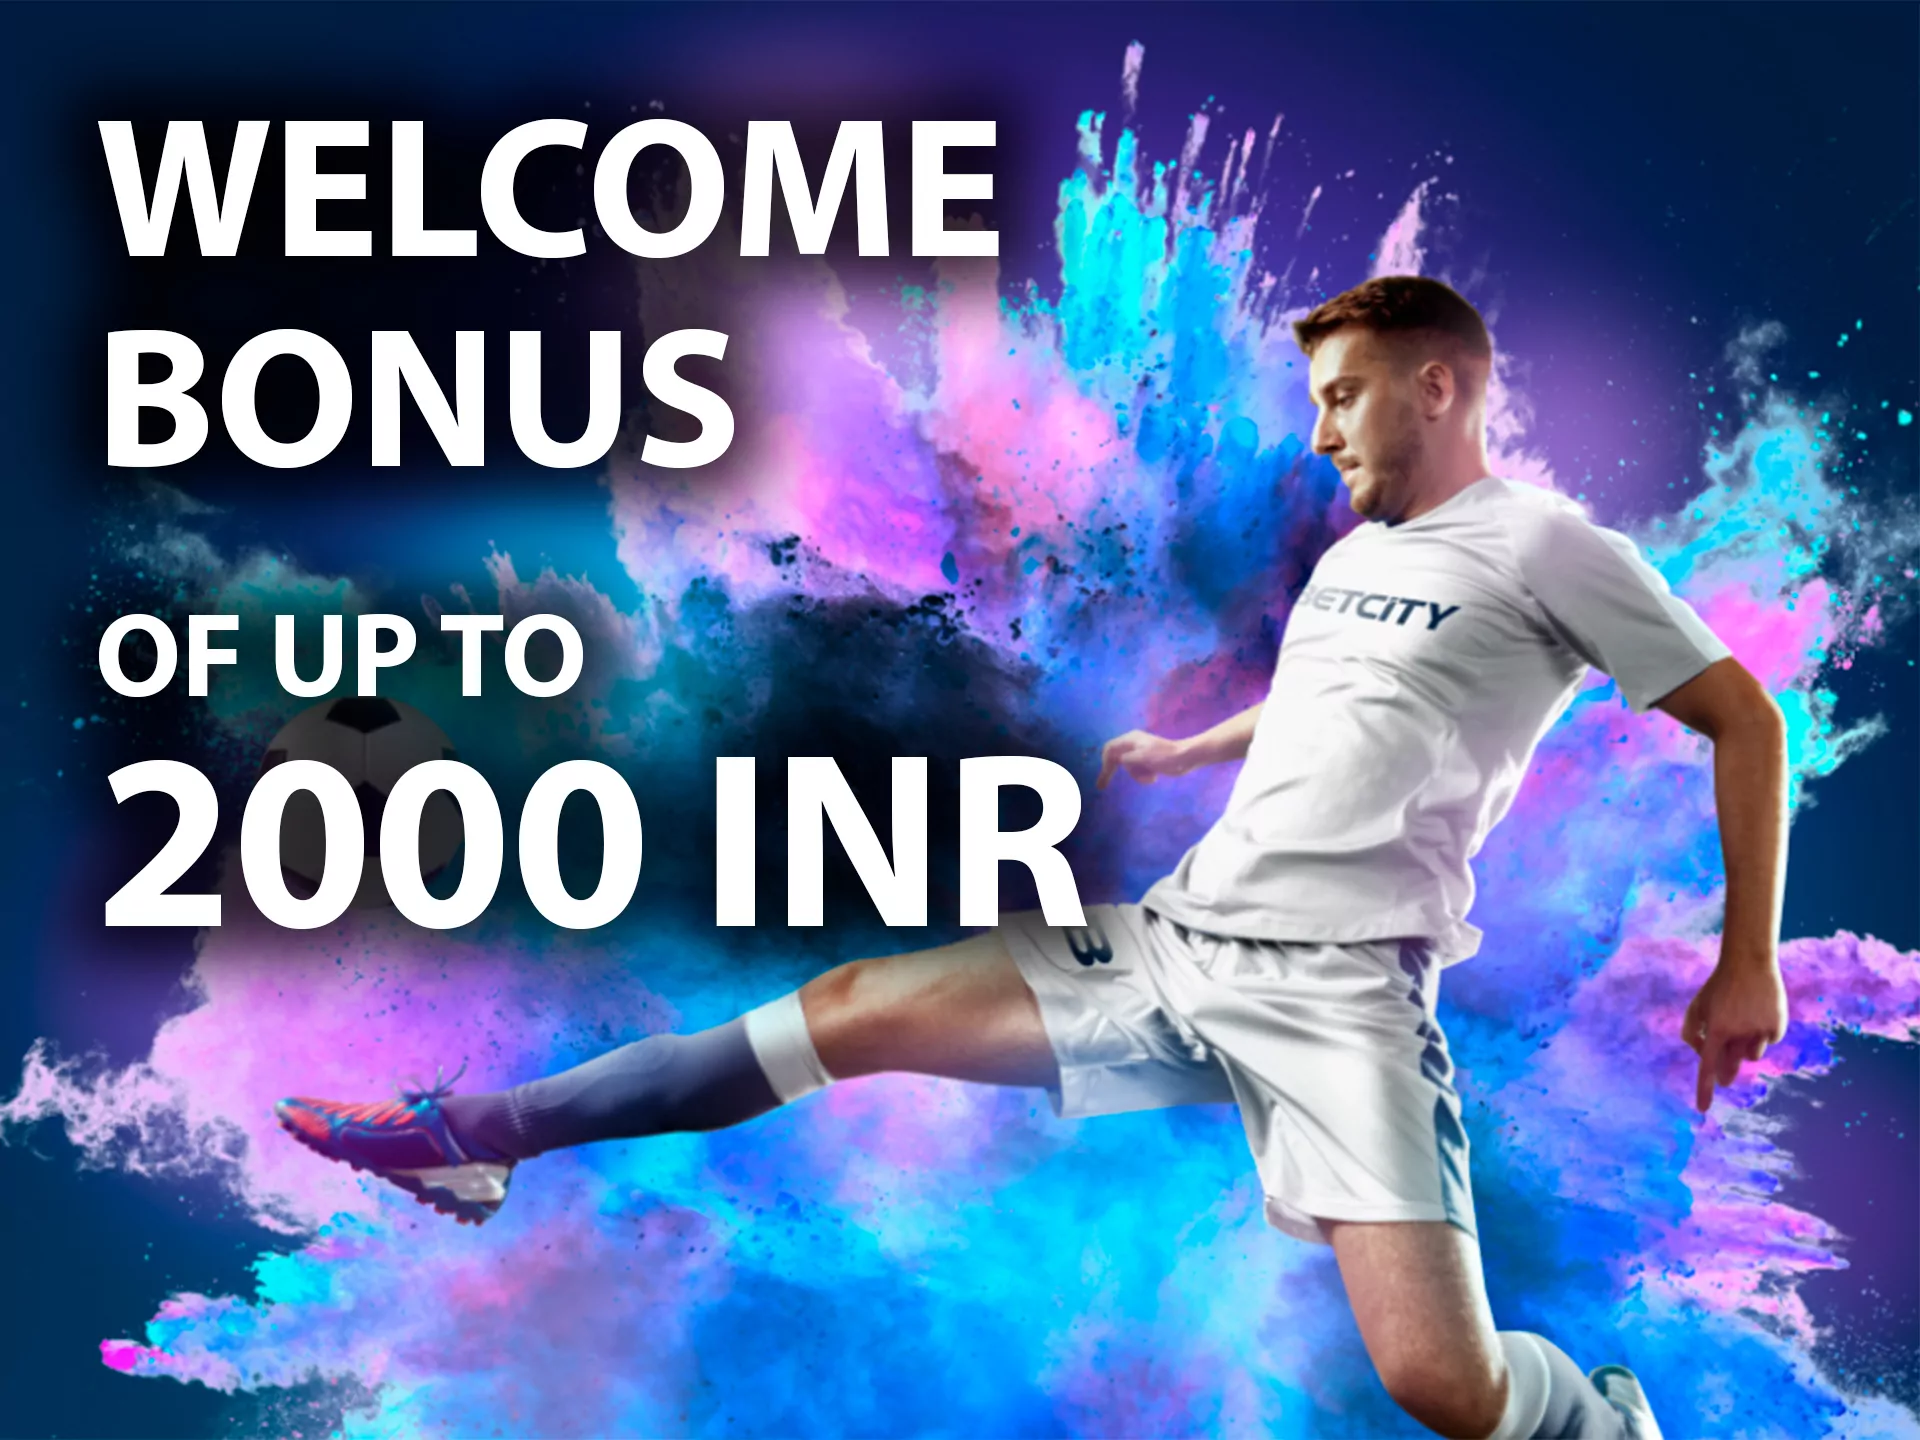 Receive the bonus of up to 2000 INR and use it on football betting.